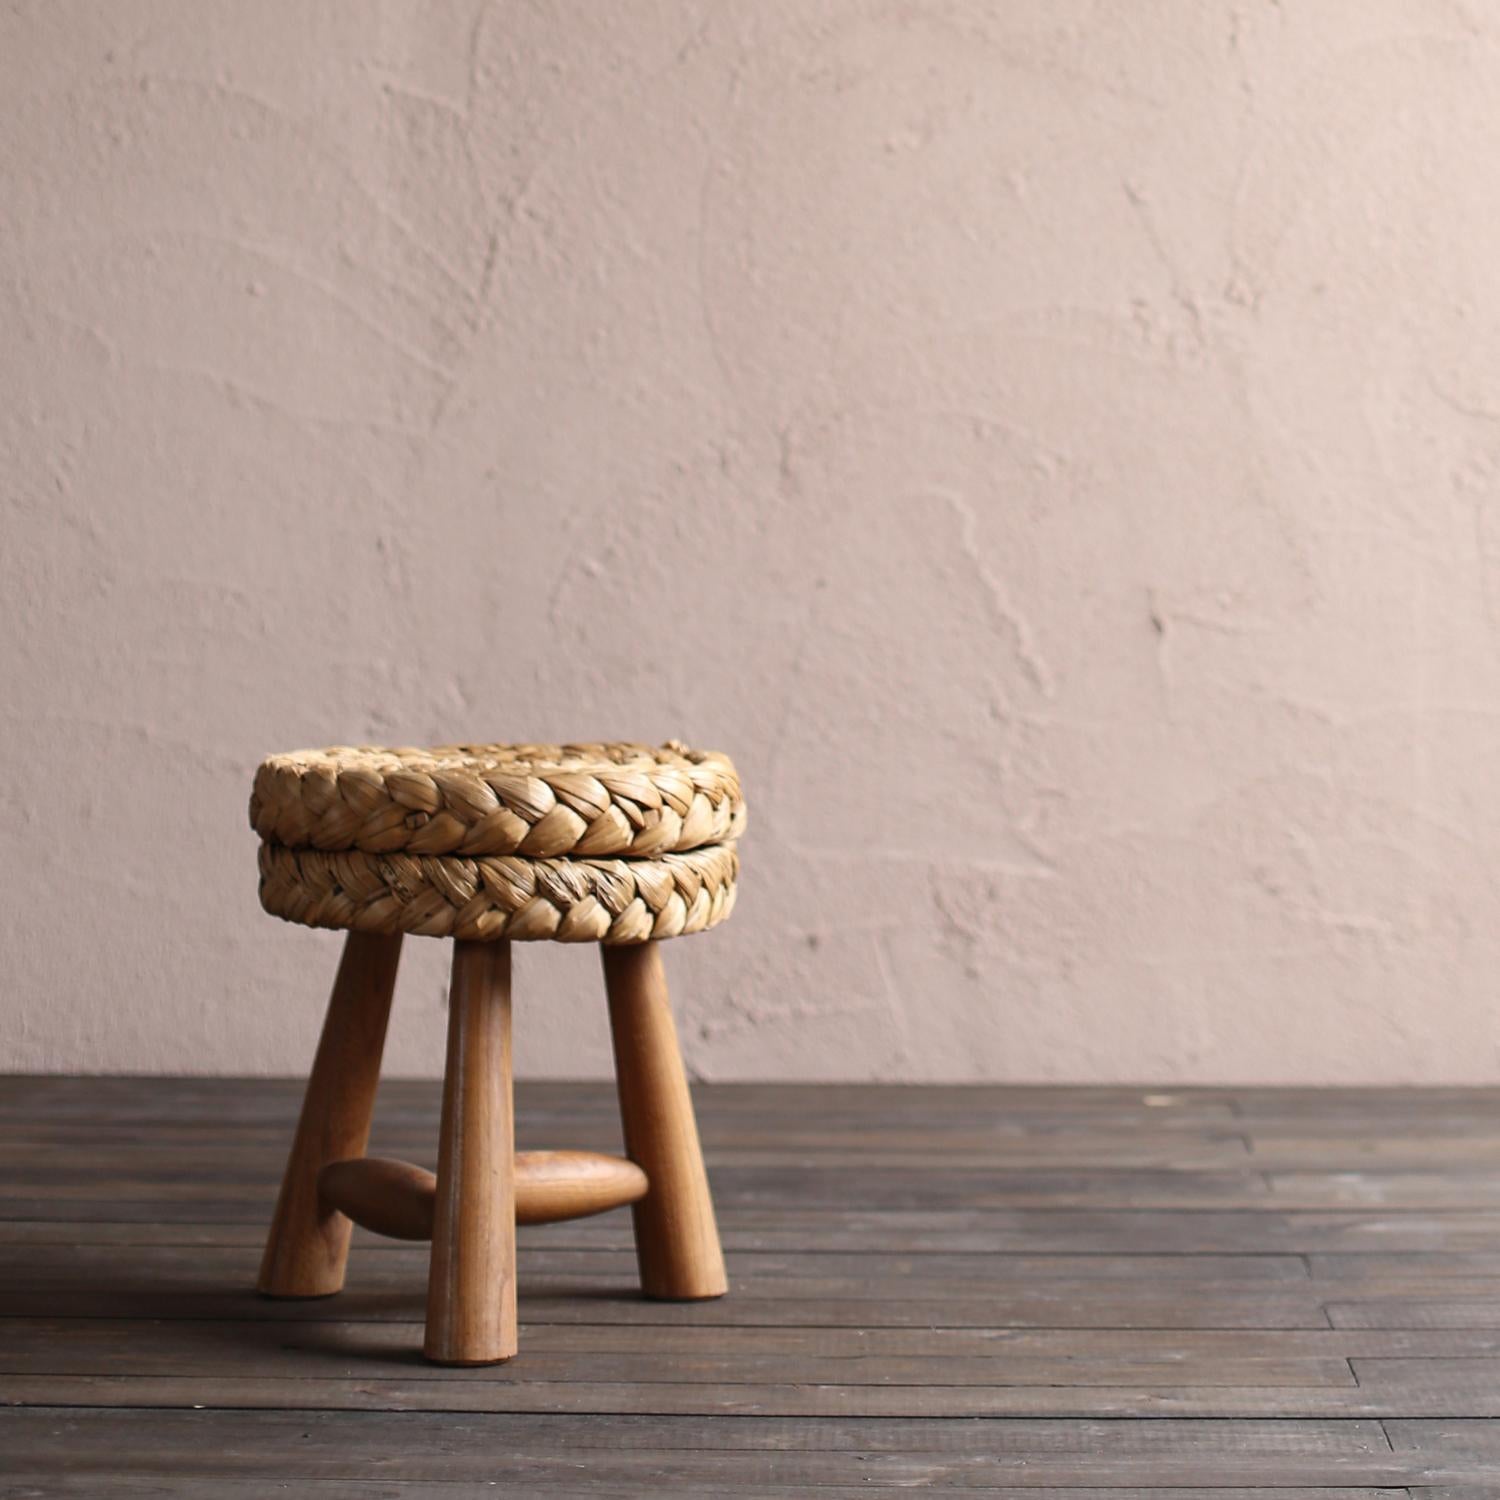 Braided stool by Adrien Audoux & Frida Minet

[Audoux-Minet]
Audoux-Minet is a design unit by Adrien Audoux and Frida Minet. Union des Artistes Modernes (UAM), founded by modern designers in 1929. Once the chairman, Robert Mallet-Stevens, led by